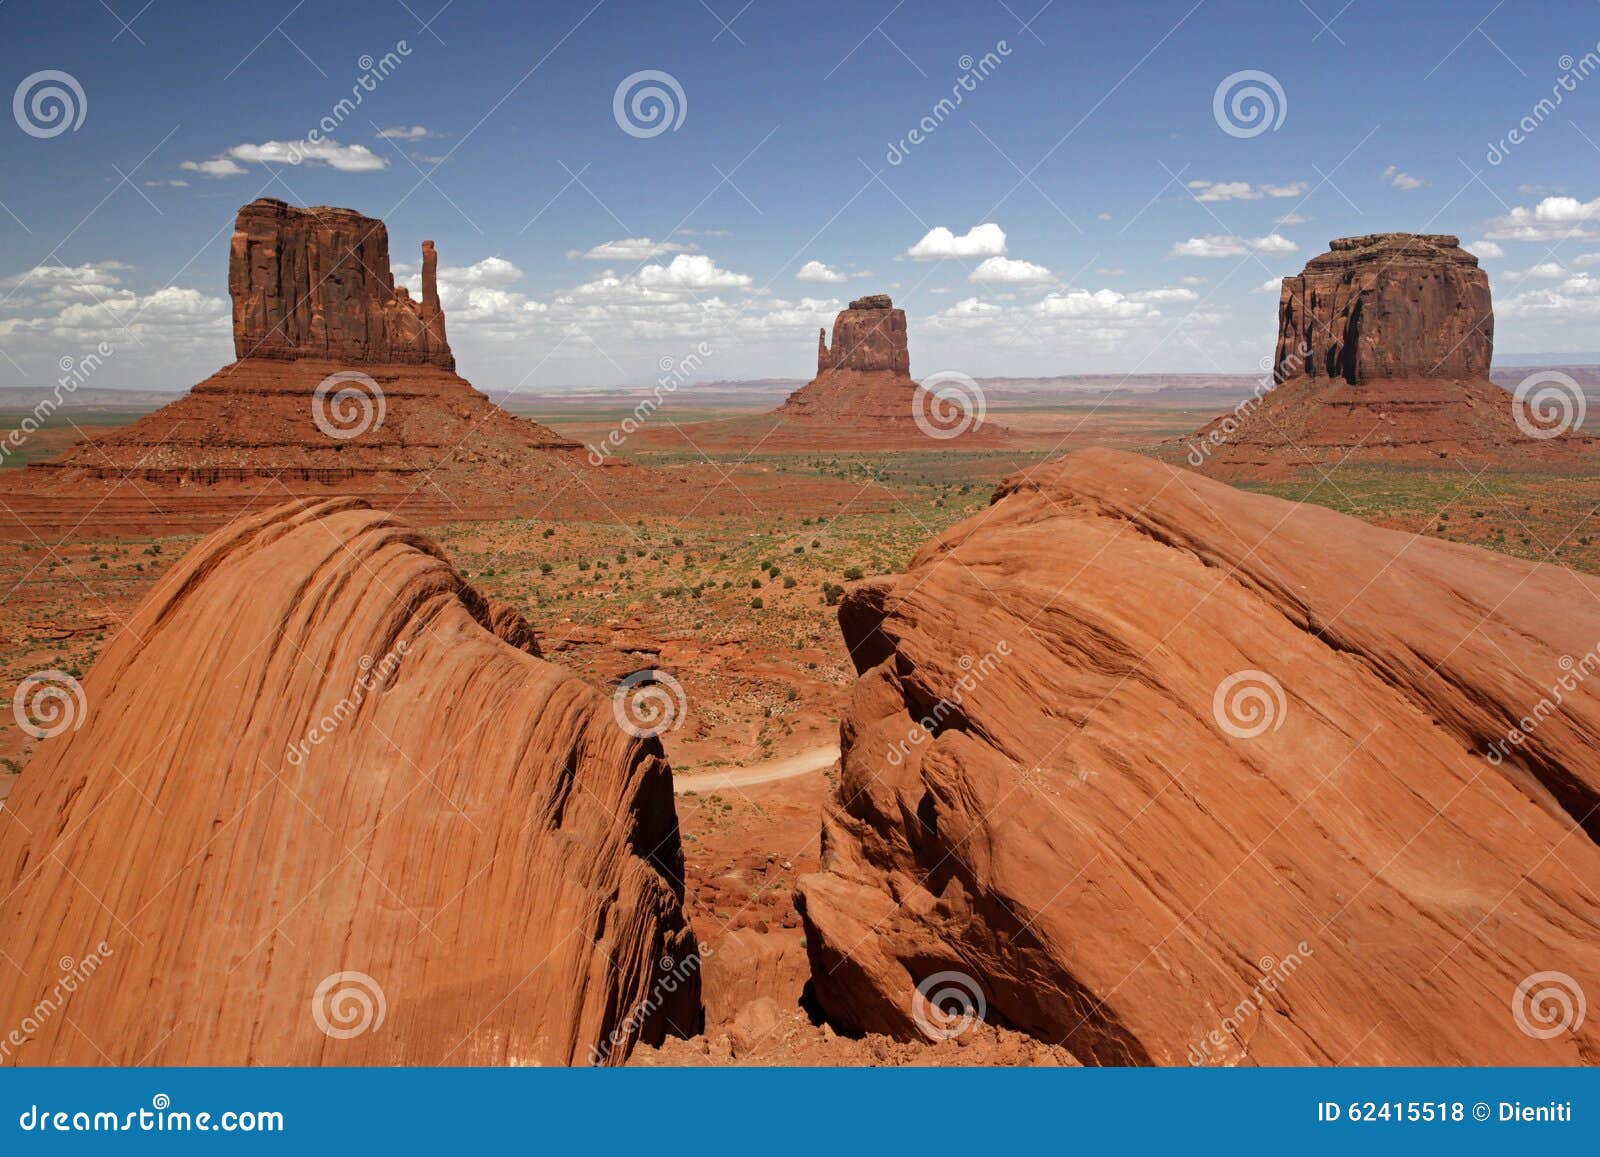 monument valley with west mitten butte, east mitten butte and merrick butte